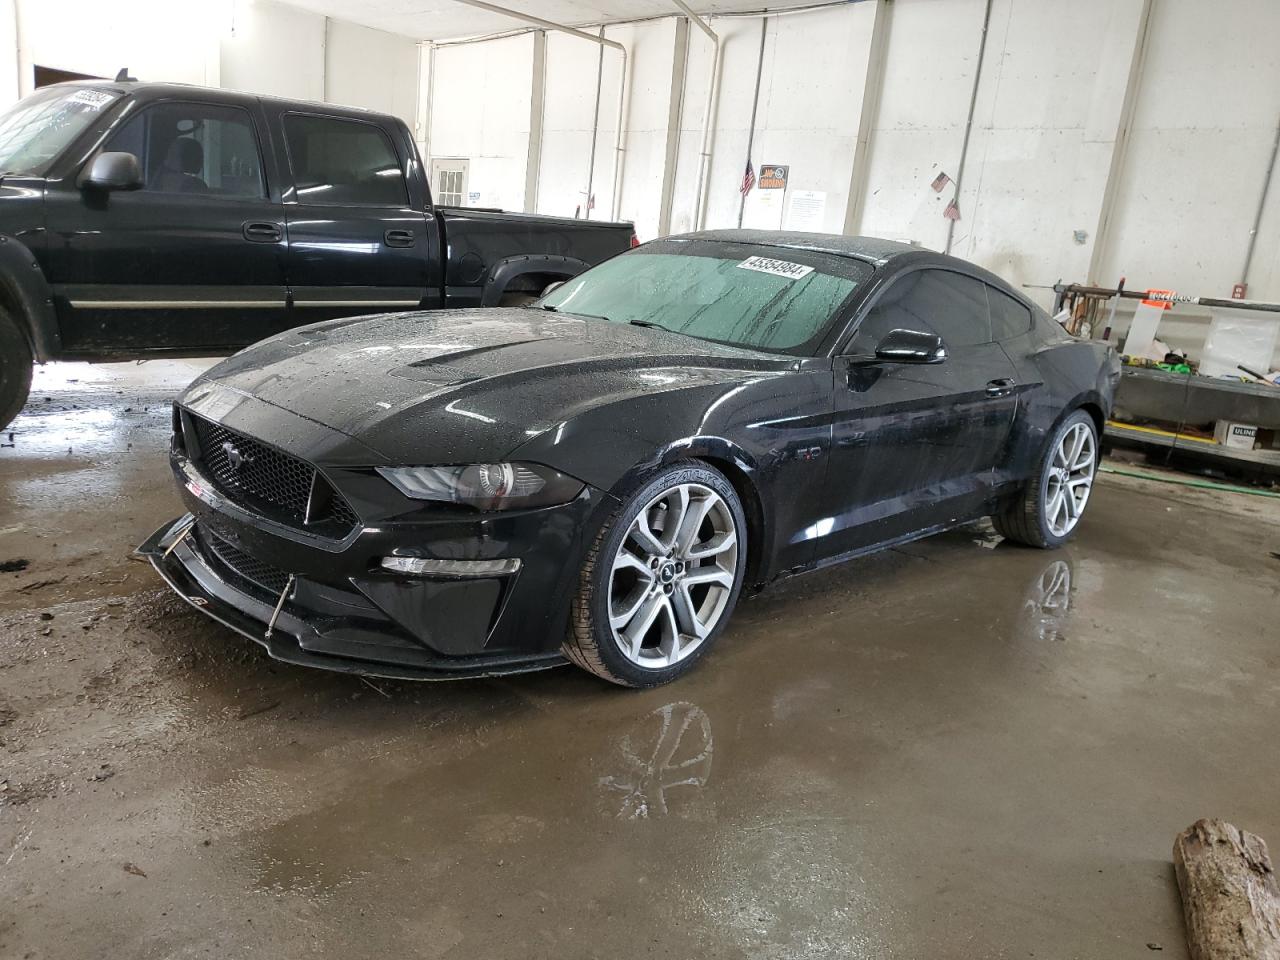 vin: 1FA6P8CF2J5179530 1FA6P8CF2J5179530 2018 ford mustang 5000 for Sale in 37354 6763, Tn - Knoxville, Madisonville, Tennessee, USA